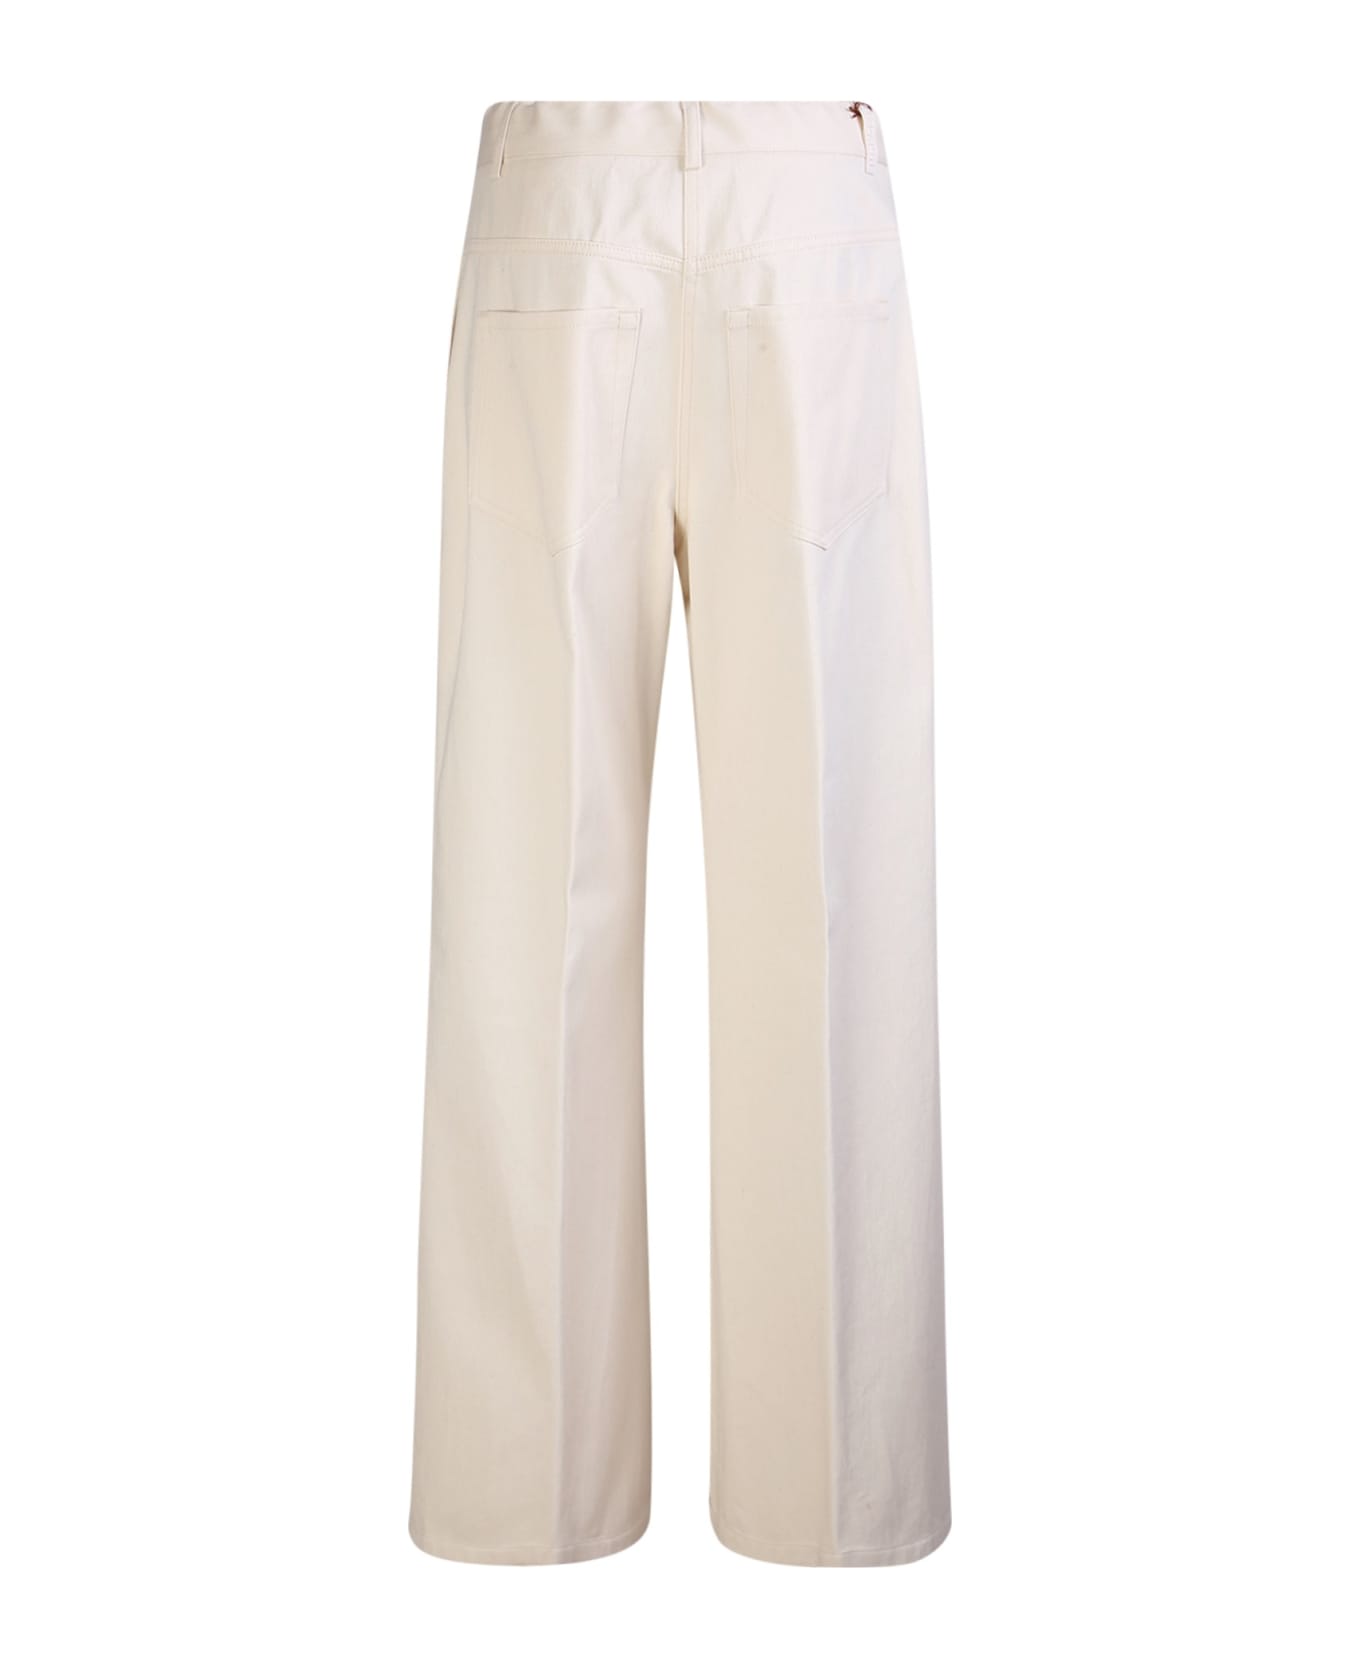 Moncler Cotton Trousers - White ボトムス